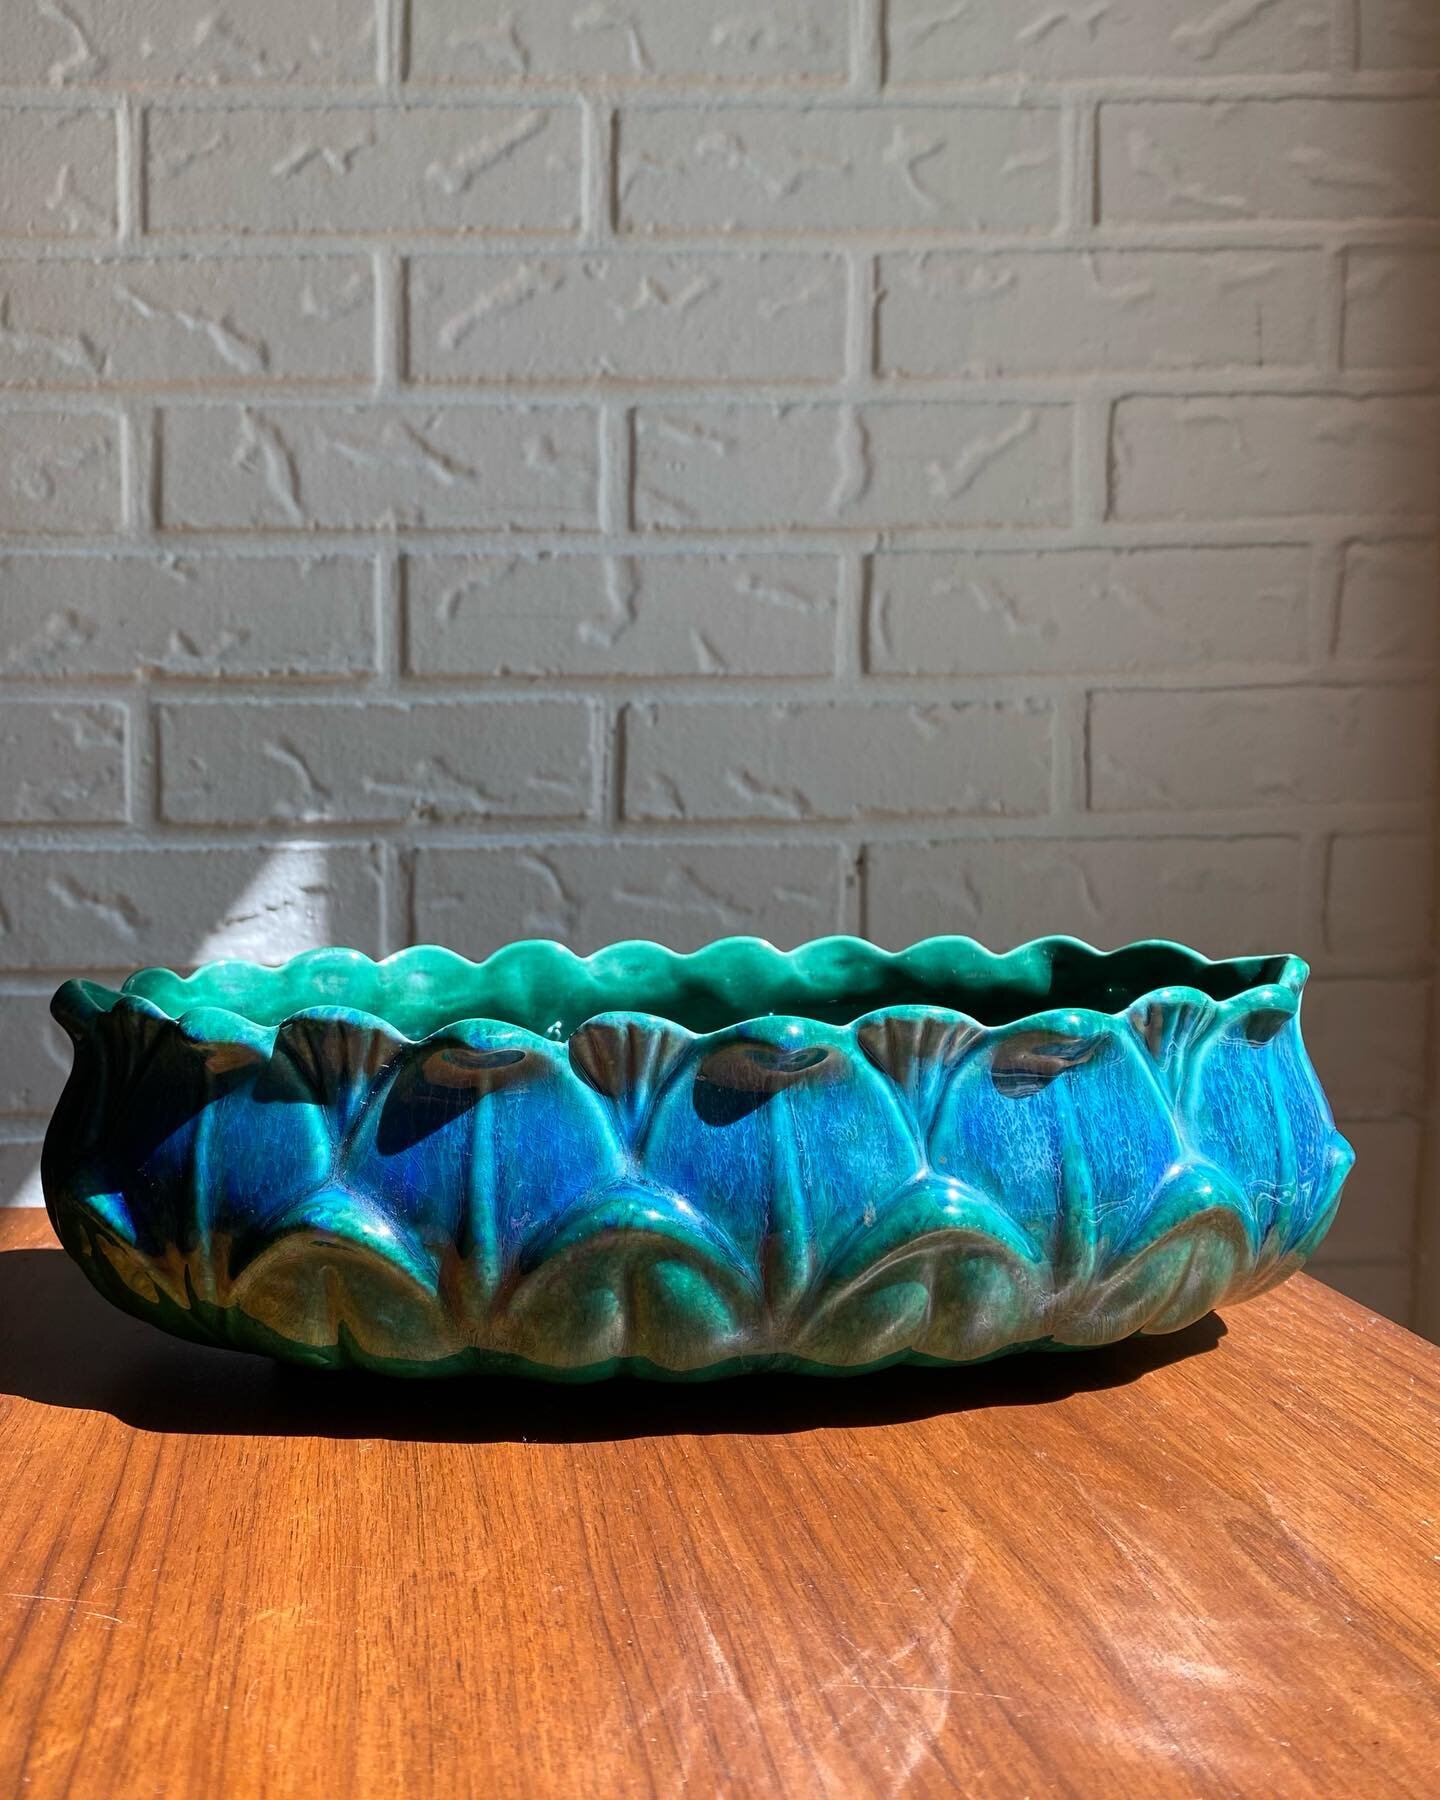 💙FOR SALE:💚
Vintage Royal Haeger Leaf Planter #391 USA
The colors on this are soooo good. I can&rsquo;t even find this piece in these colors online. 
Excellent vintage condition: Verrrrry minor crazing. See extreme closeup. 
12&rdquo; long 3.5&rdqu